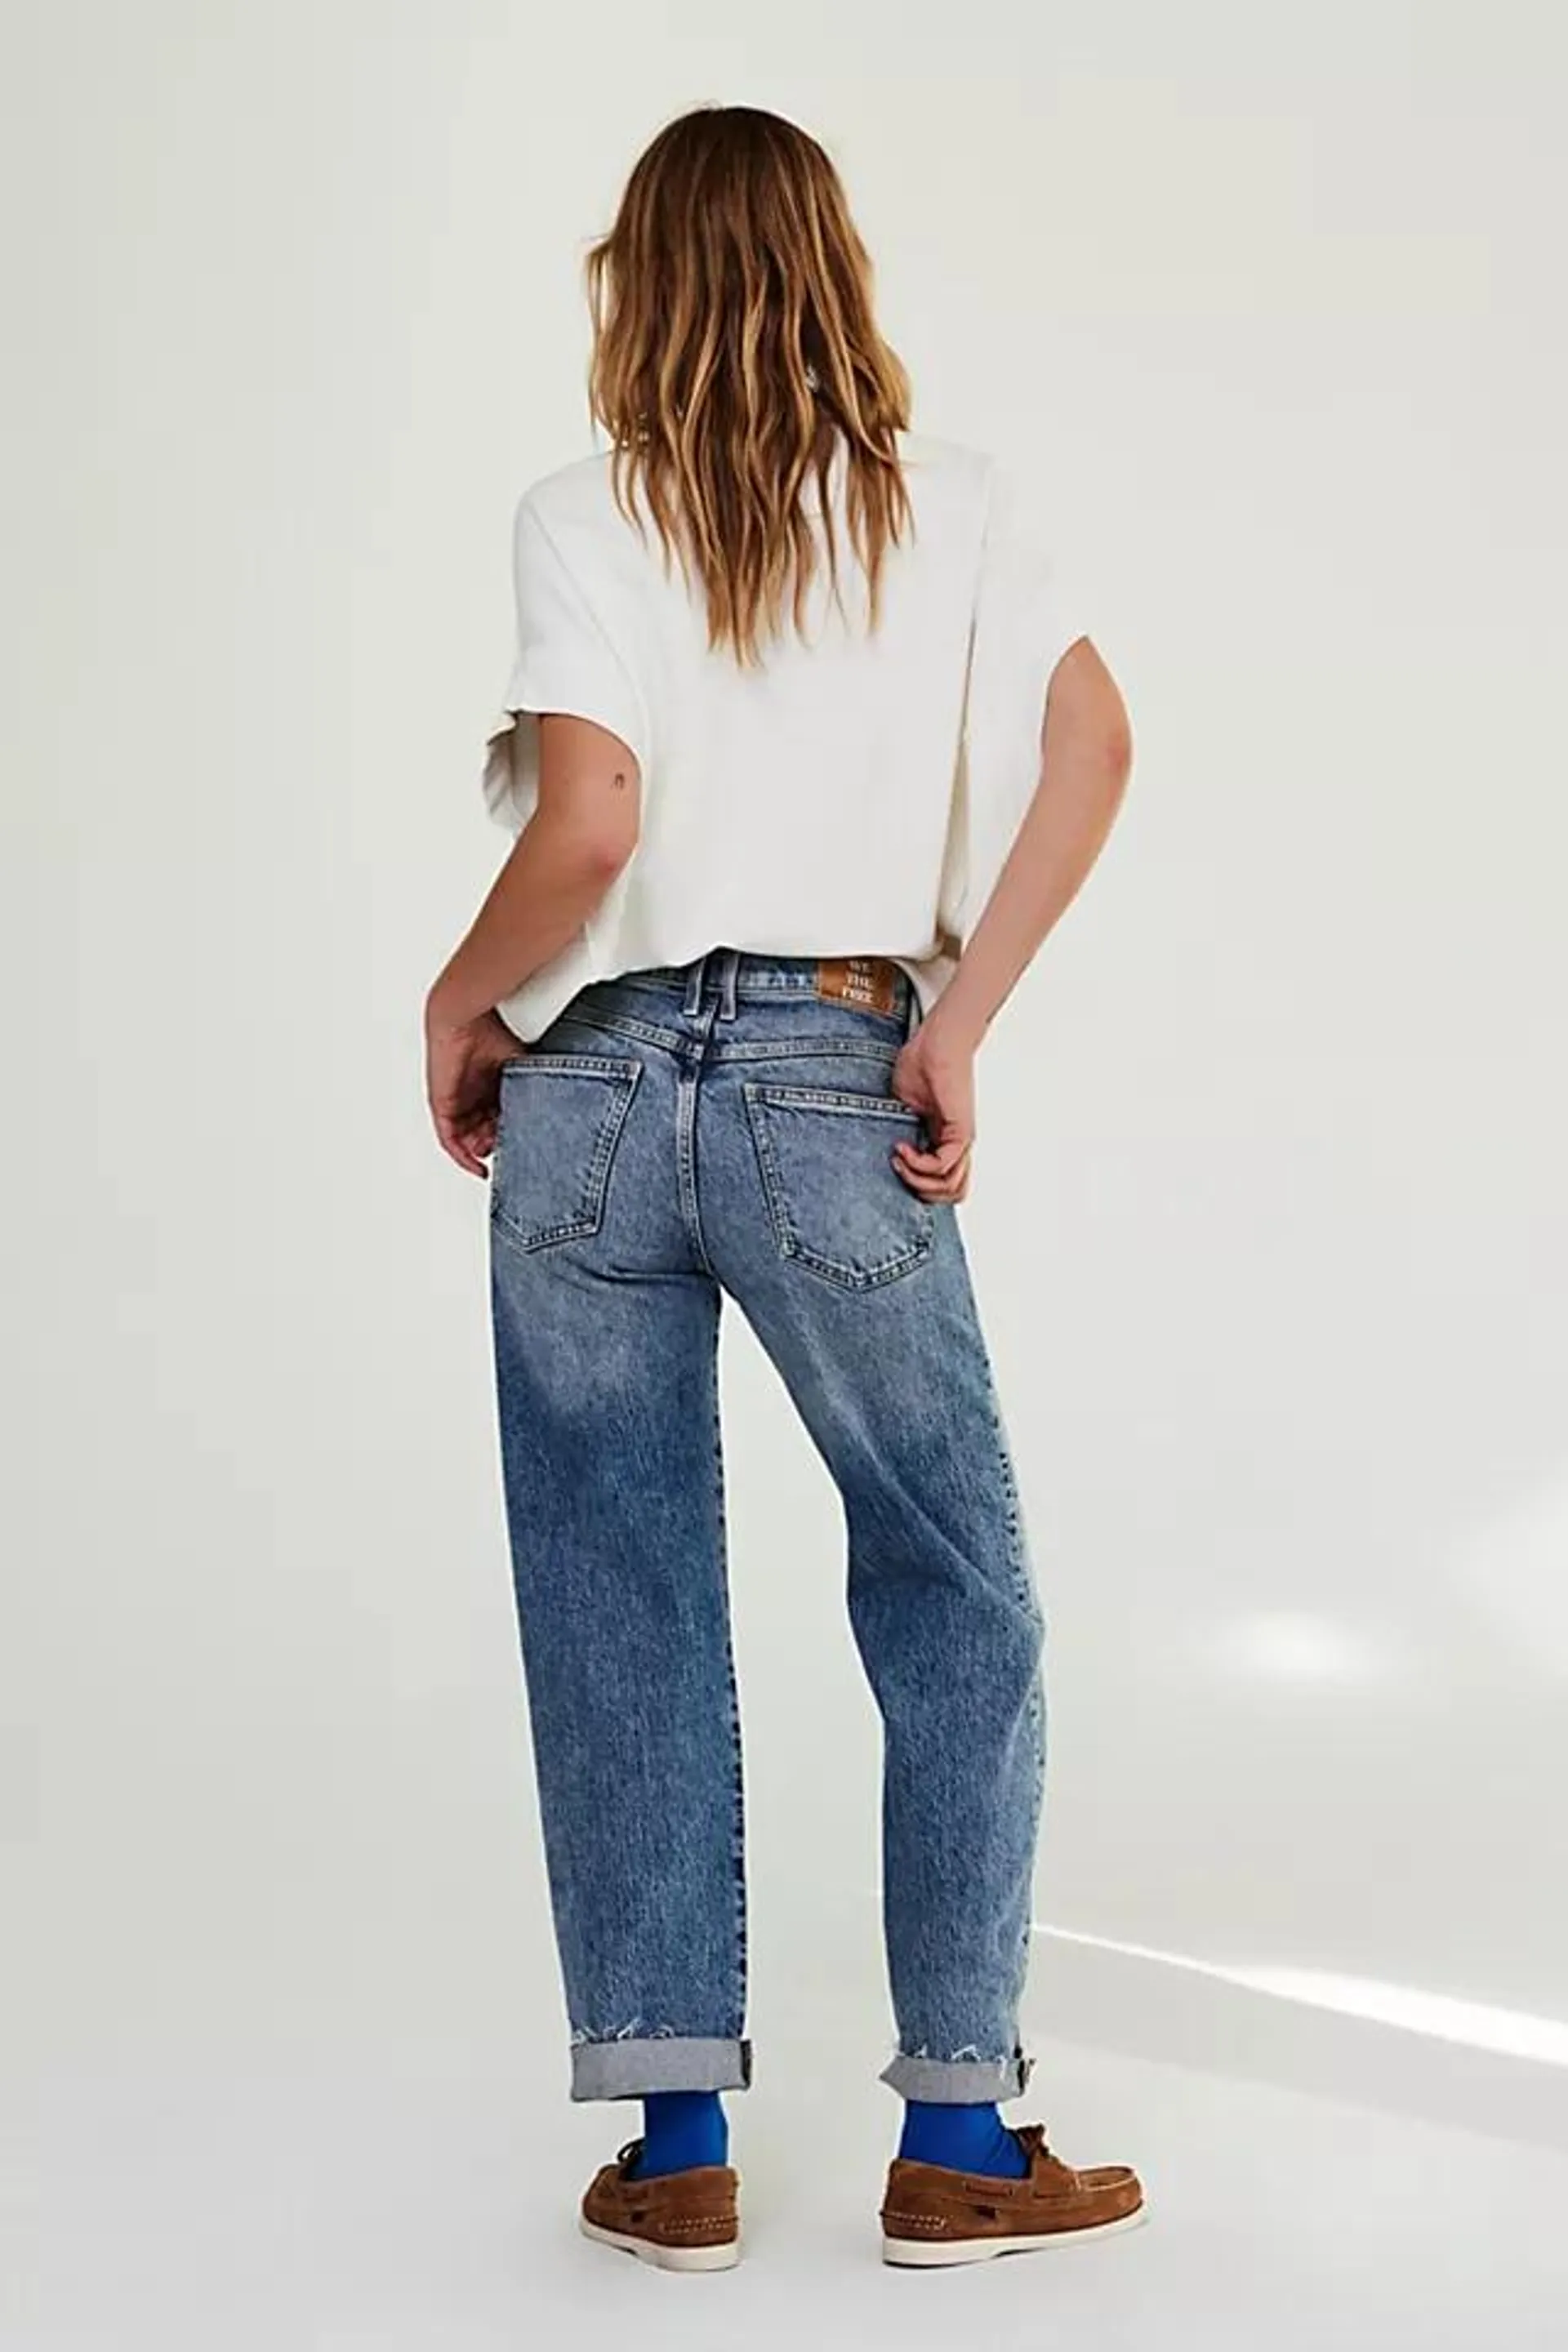 We The Free Risk Taker High-Rise Jeans